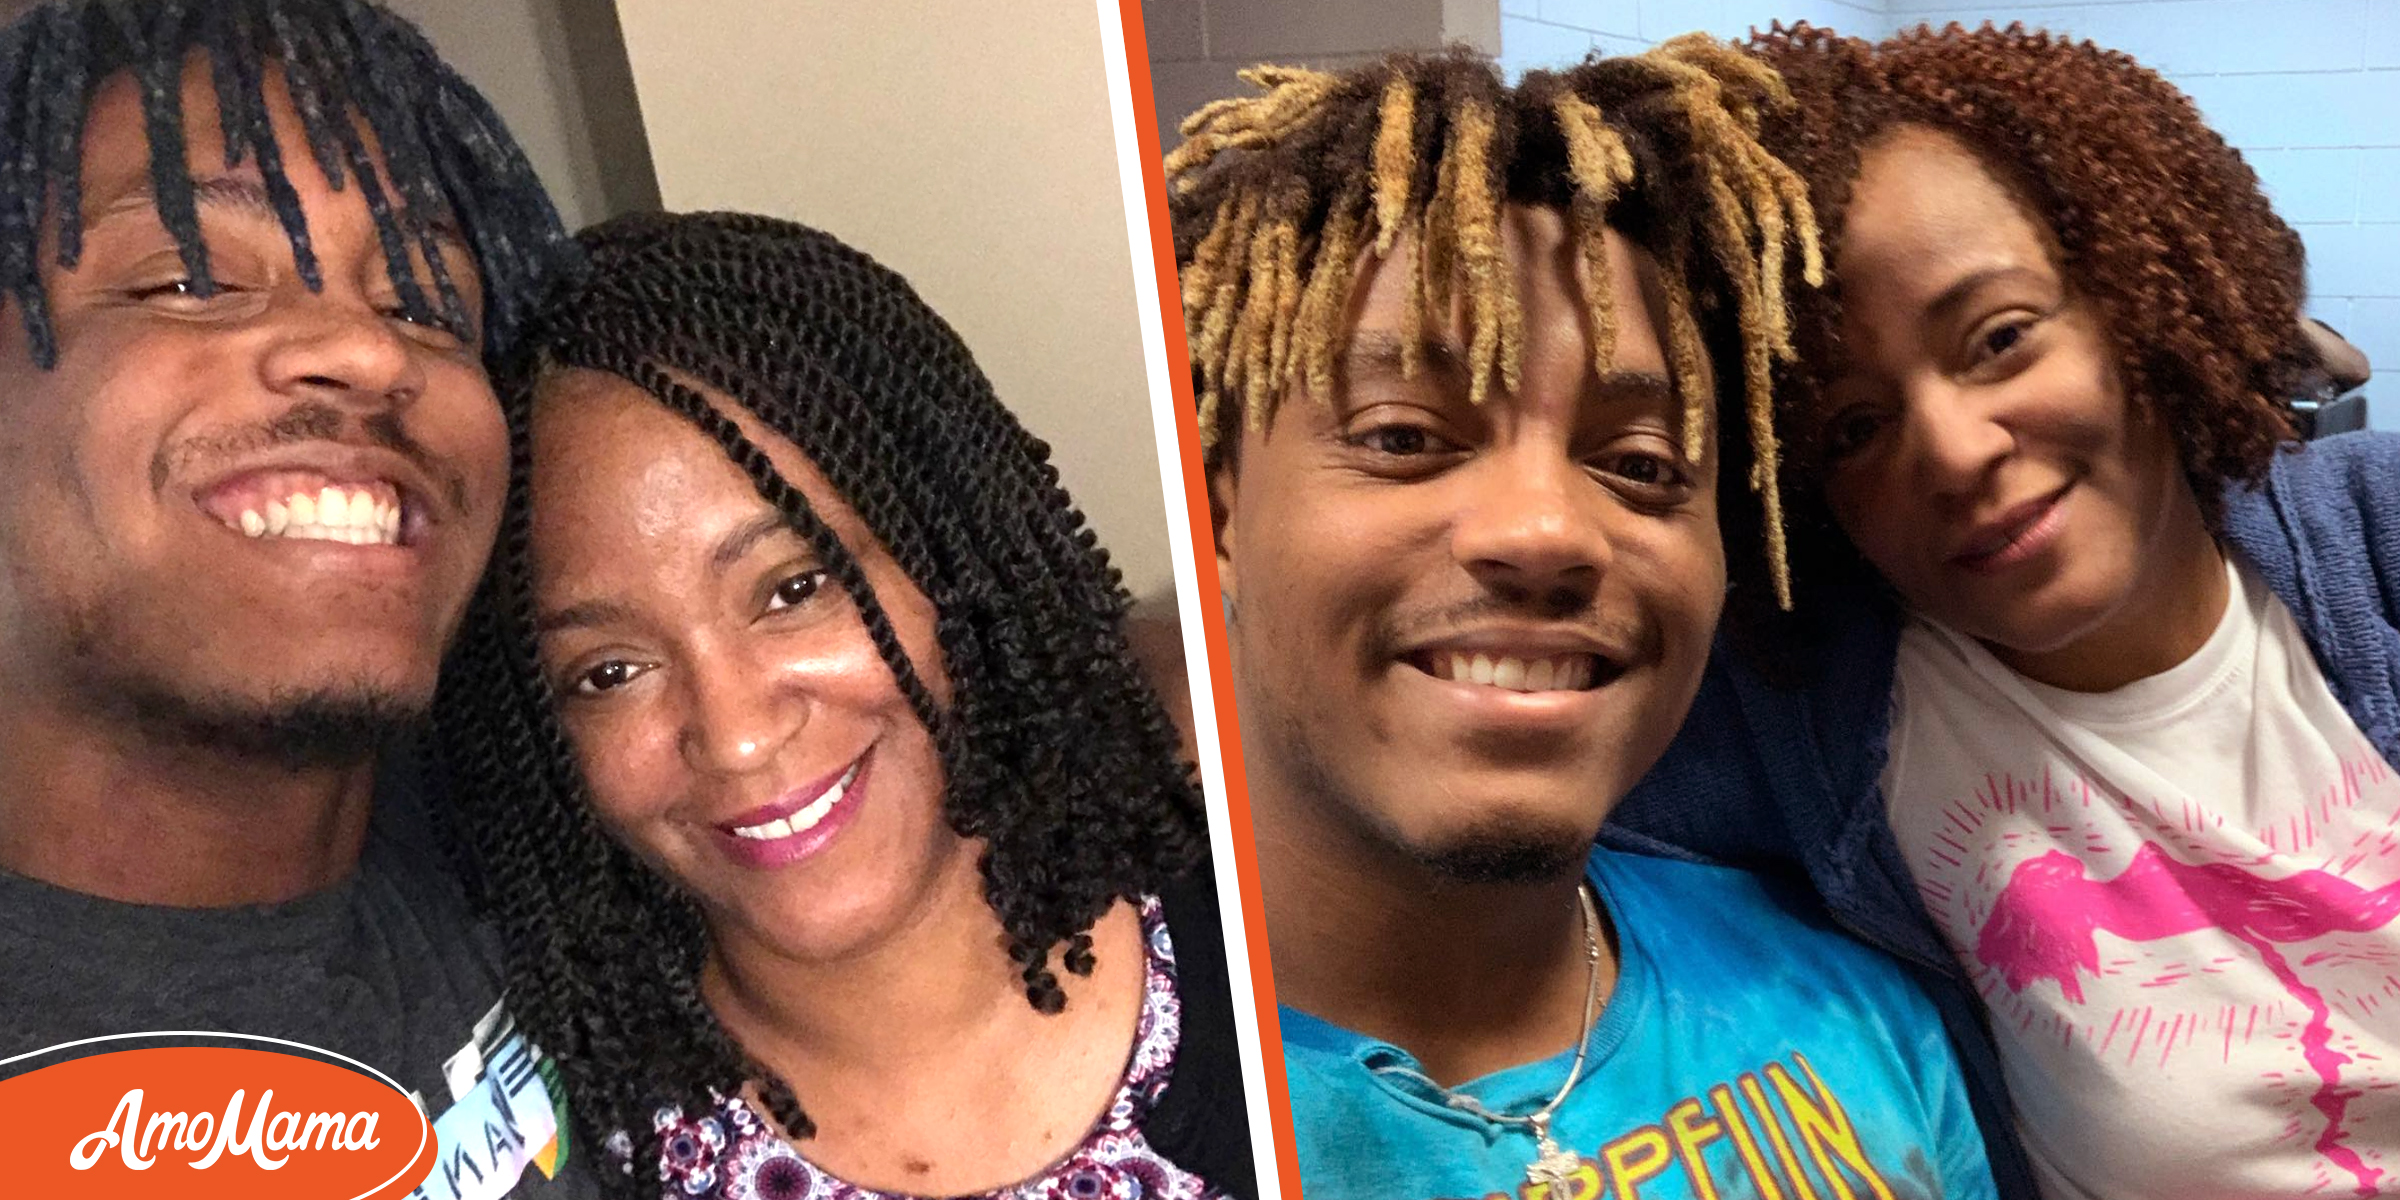 Carmella Wallace Is Juice WRLD's Mother and She Became a Mental Health Advocate